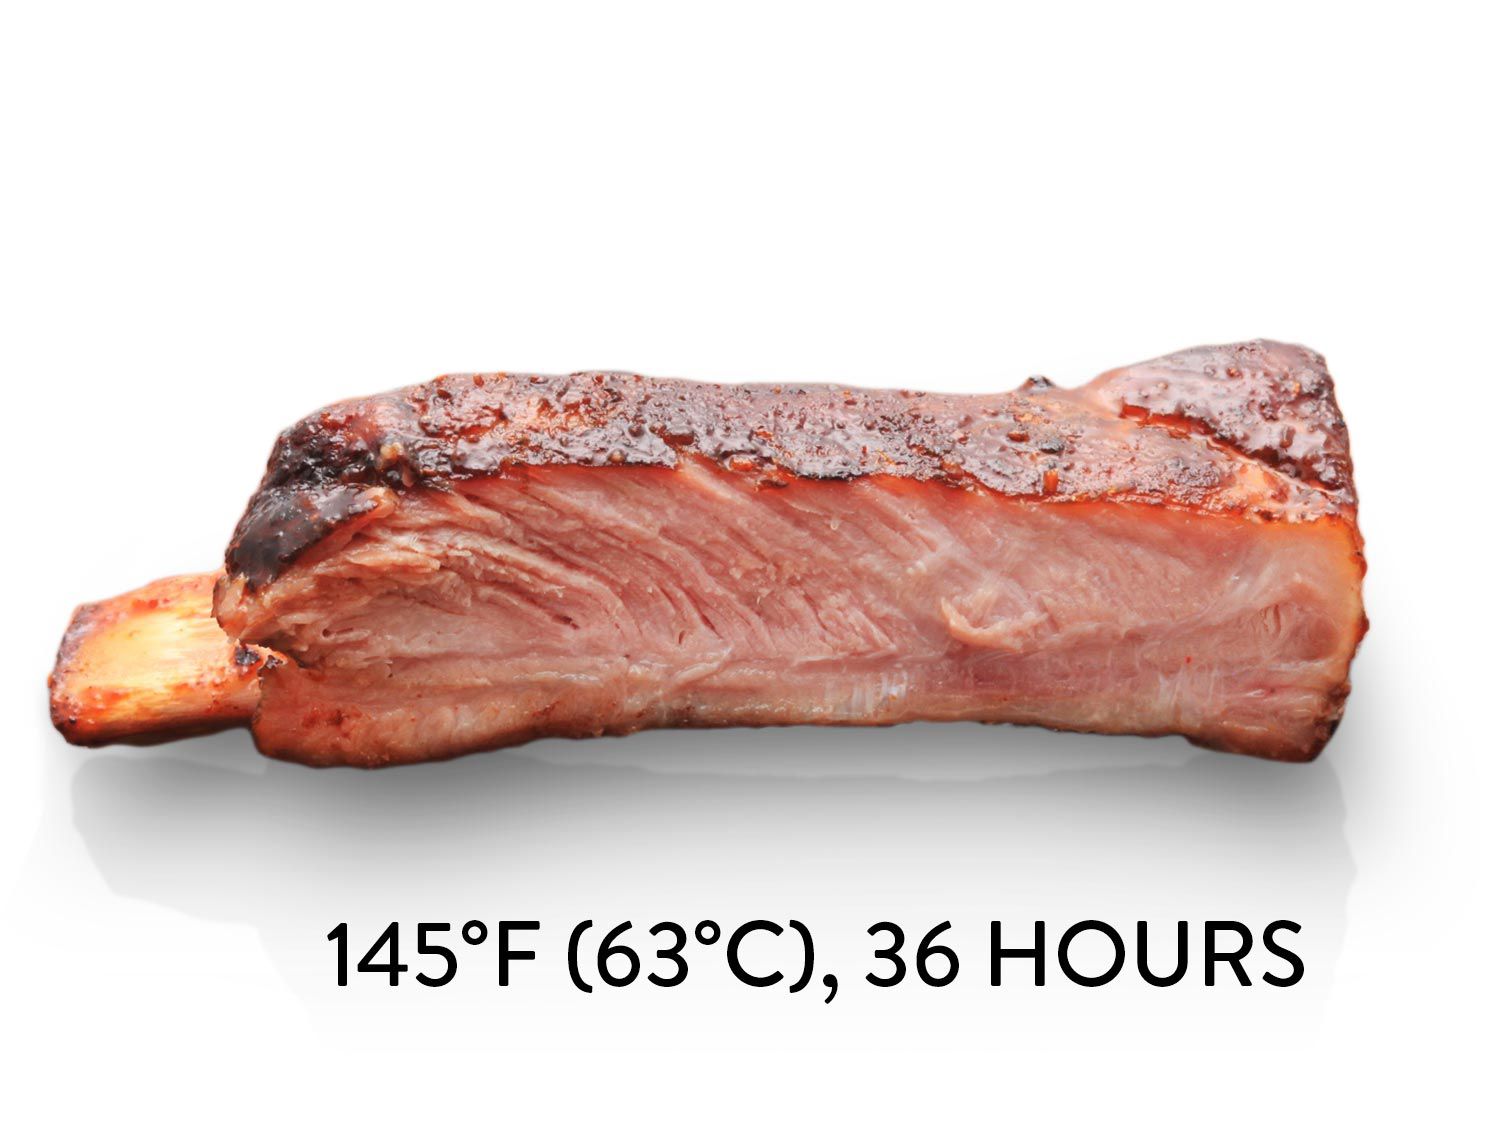 Photo of a pork rib cooked sous vide at 145°F for 36 hours